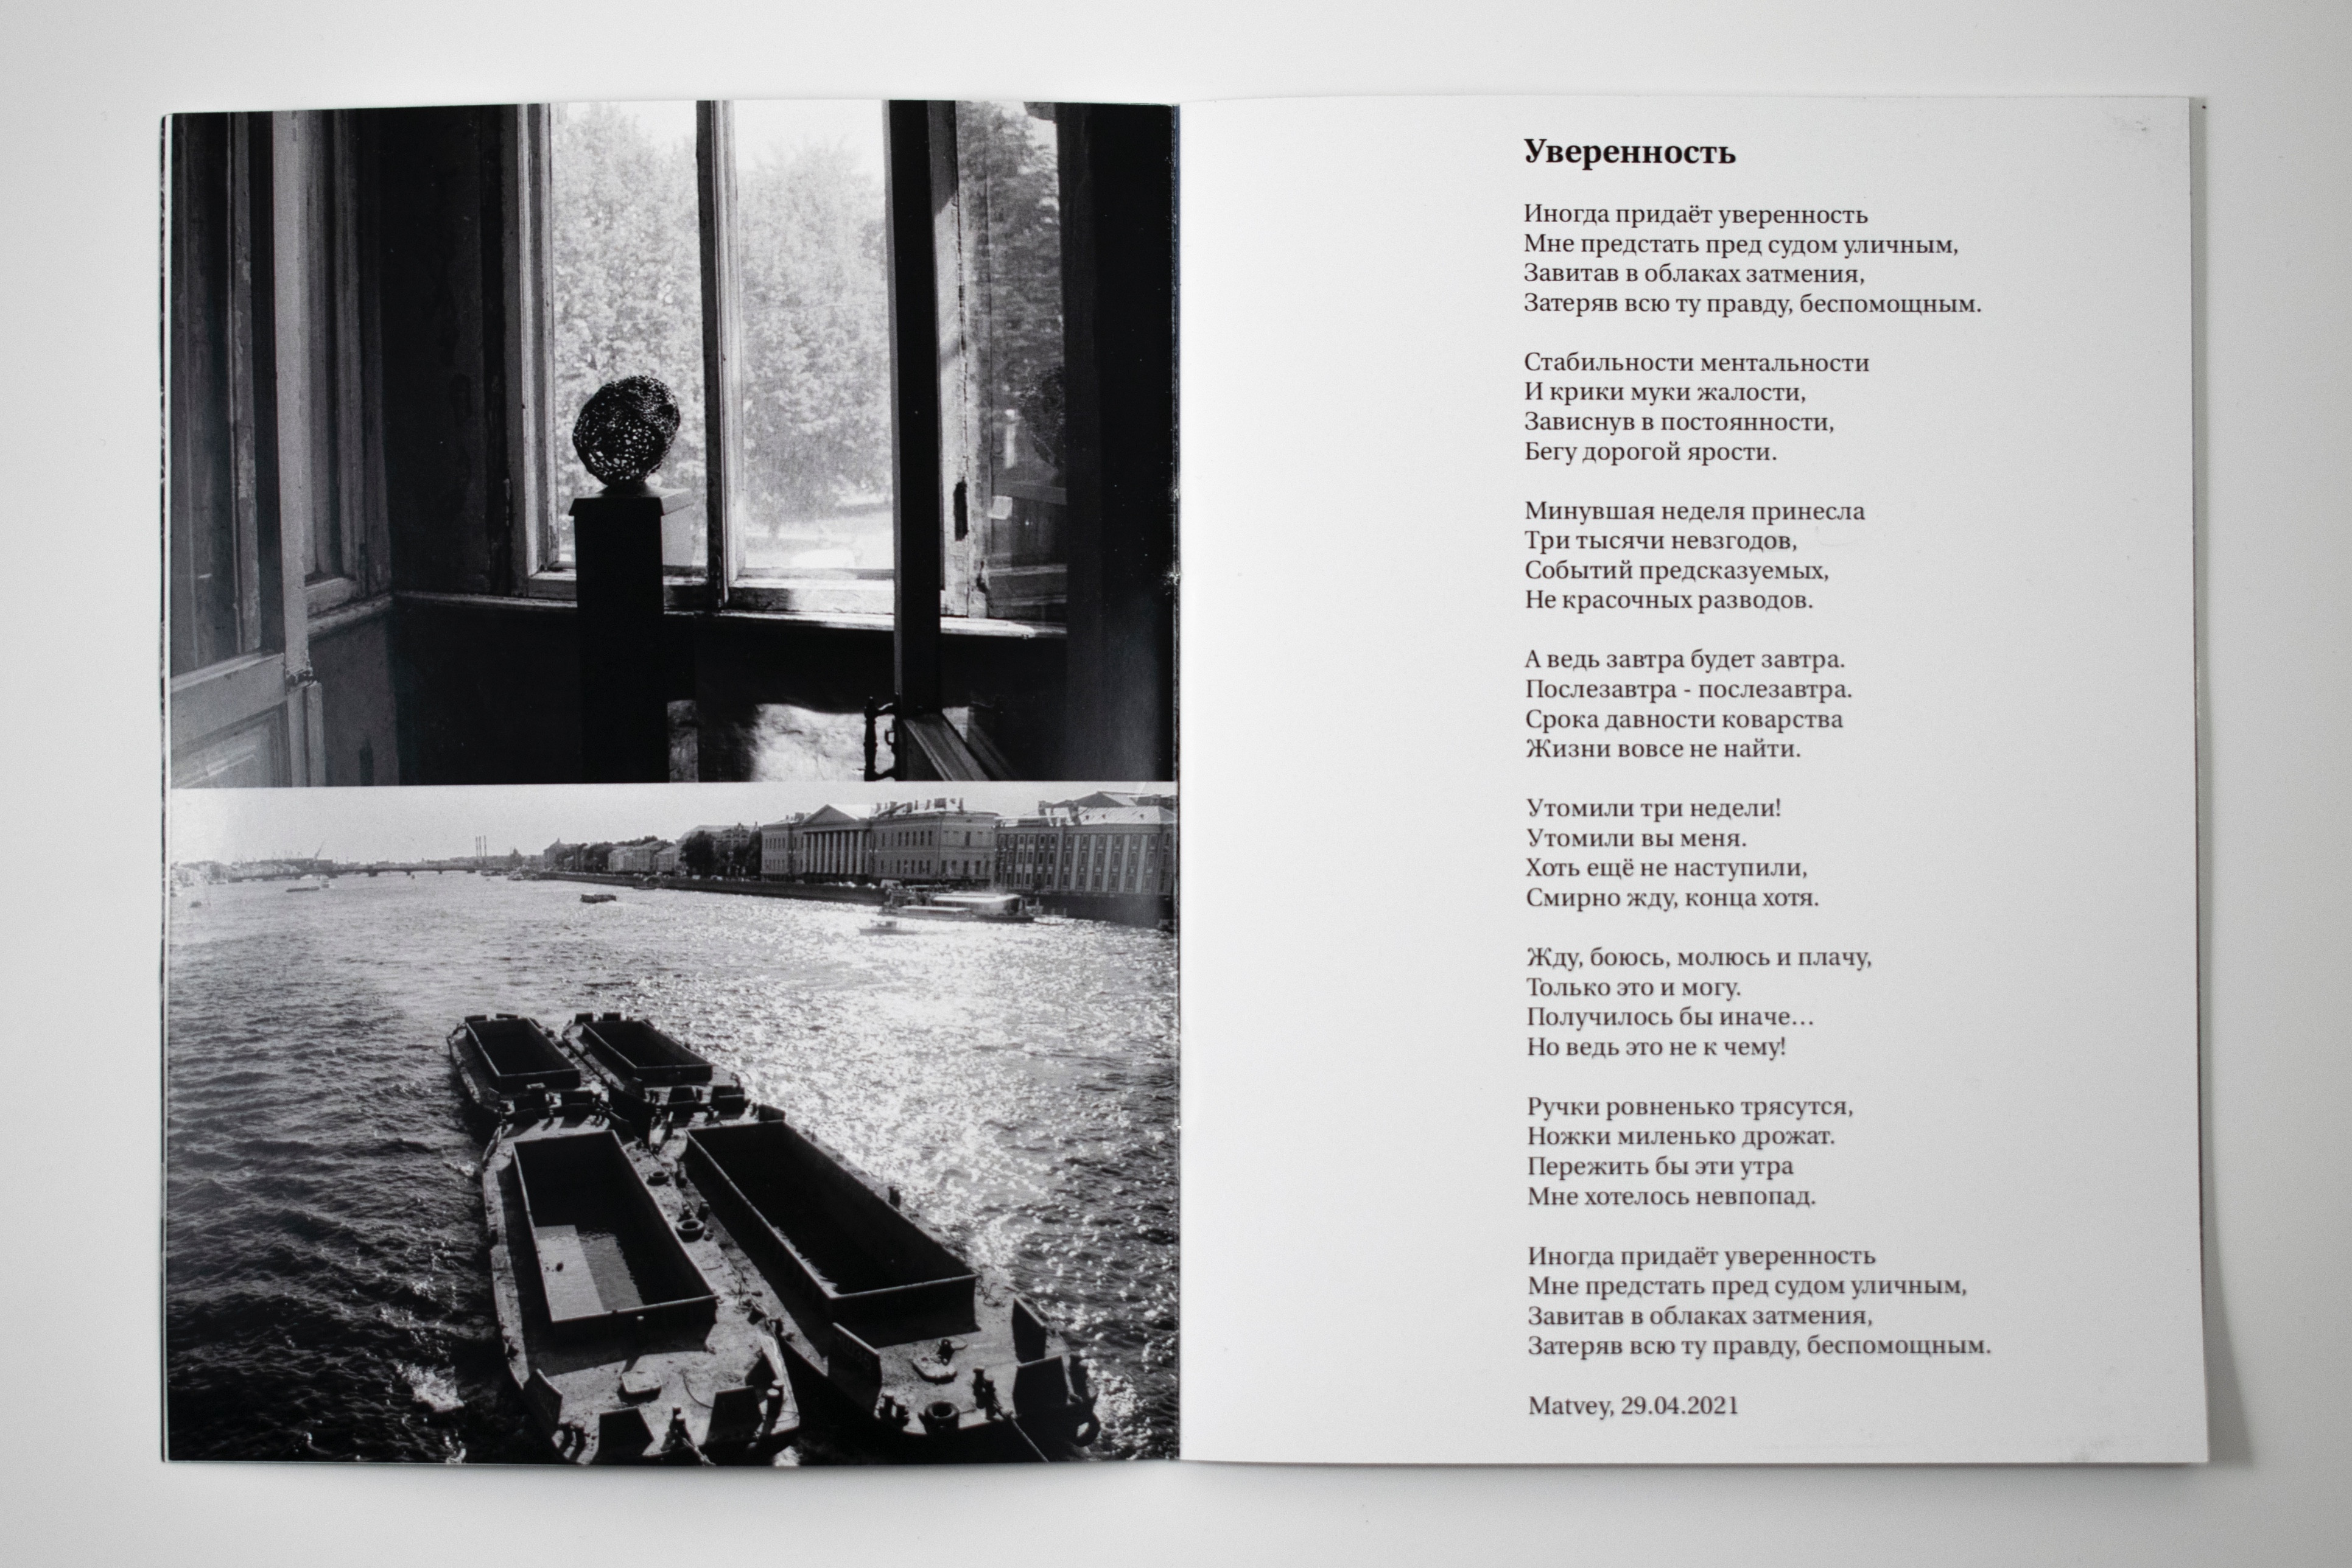 The format of combinational photography and poetry in Steklo & Stuk.